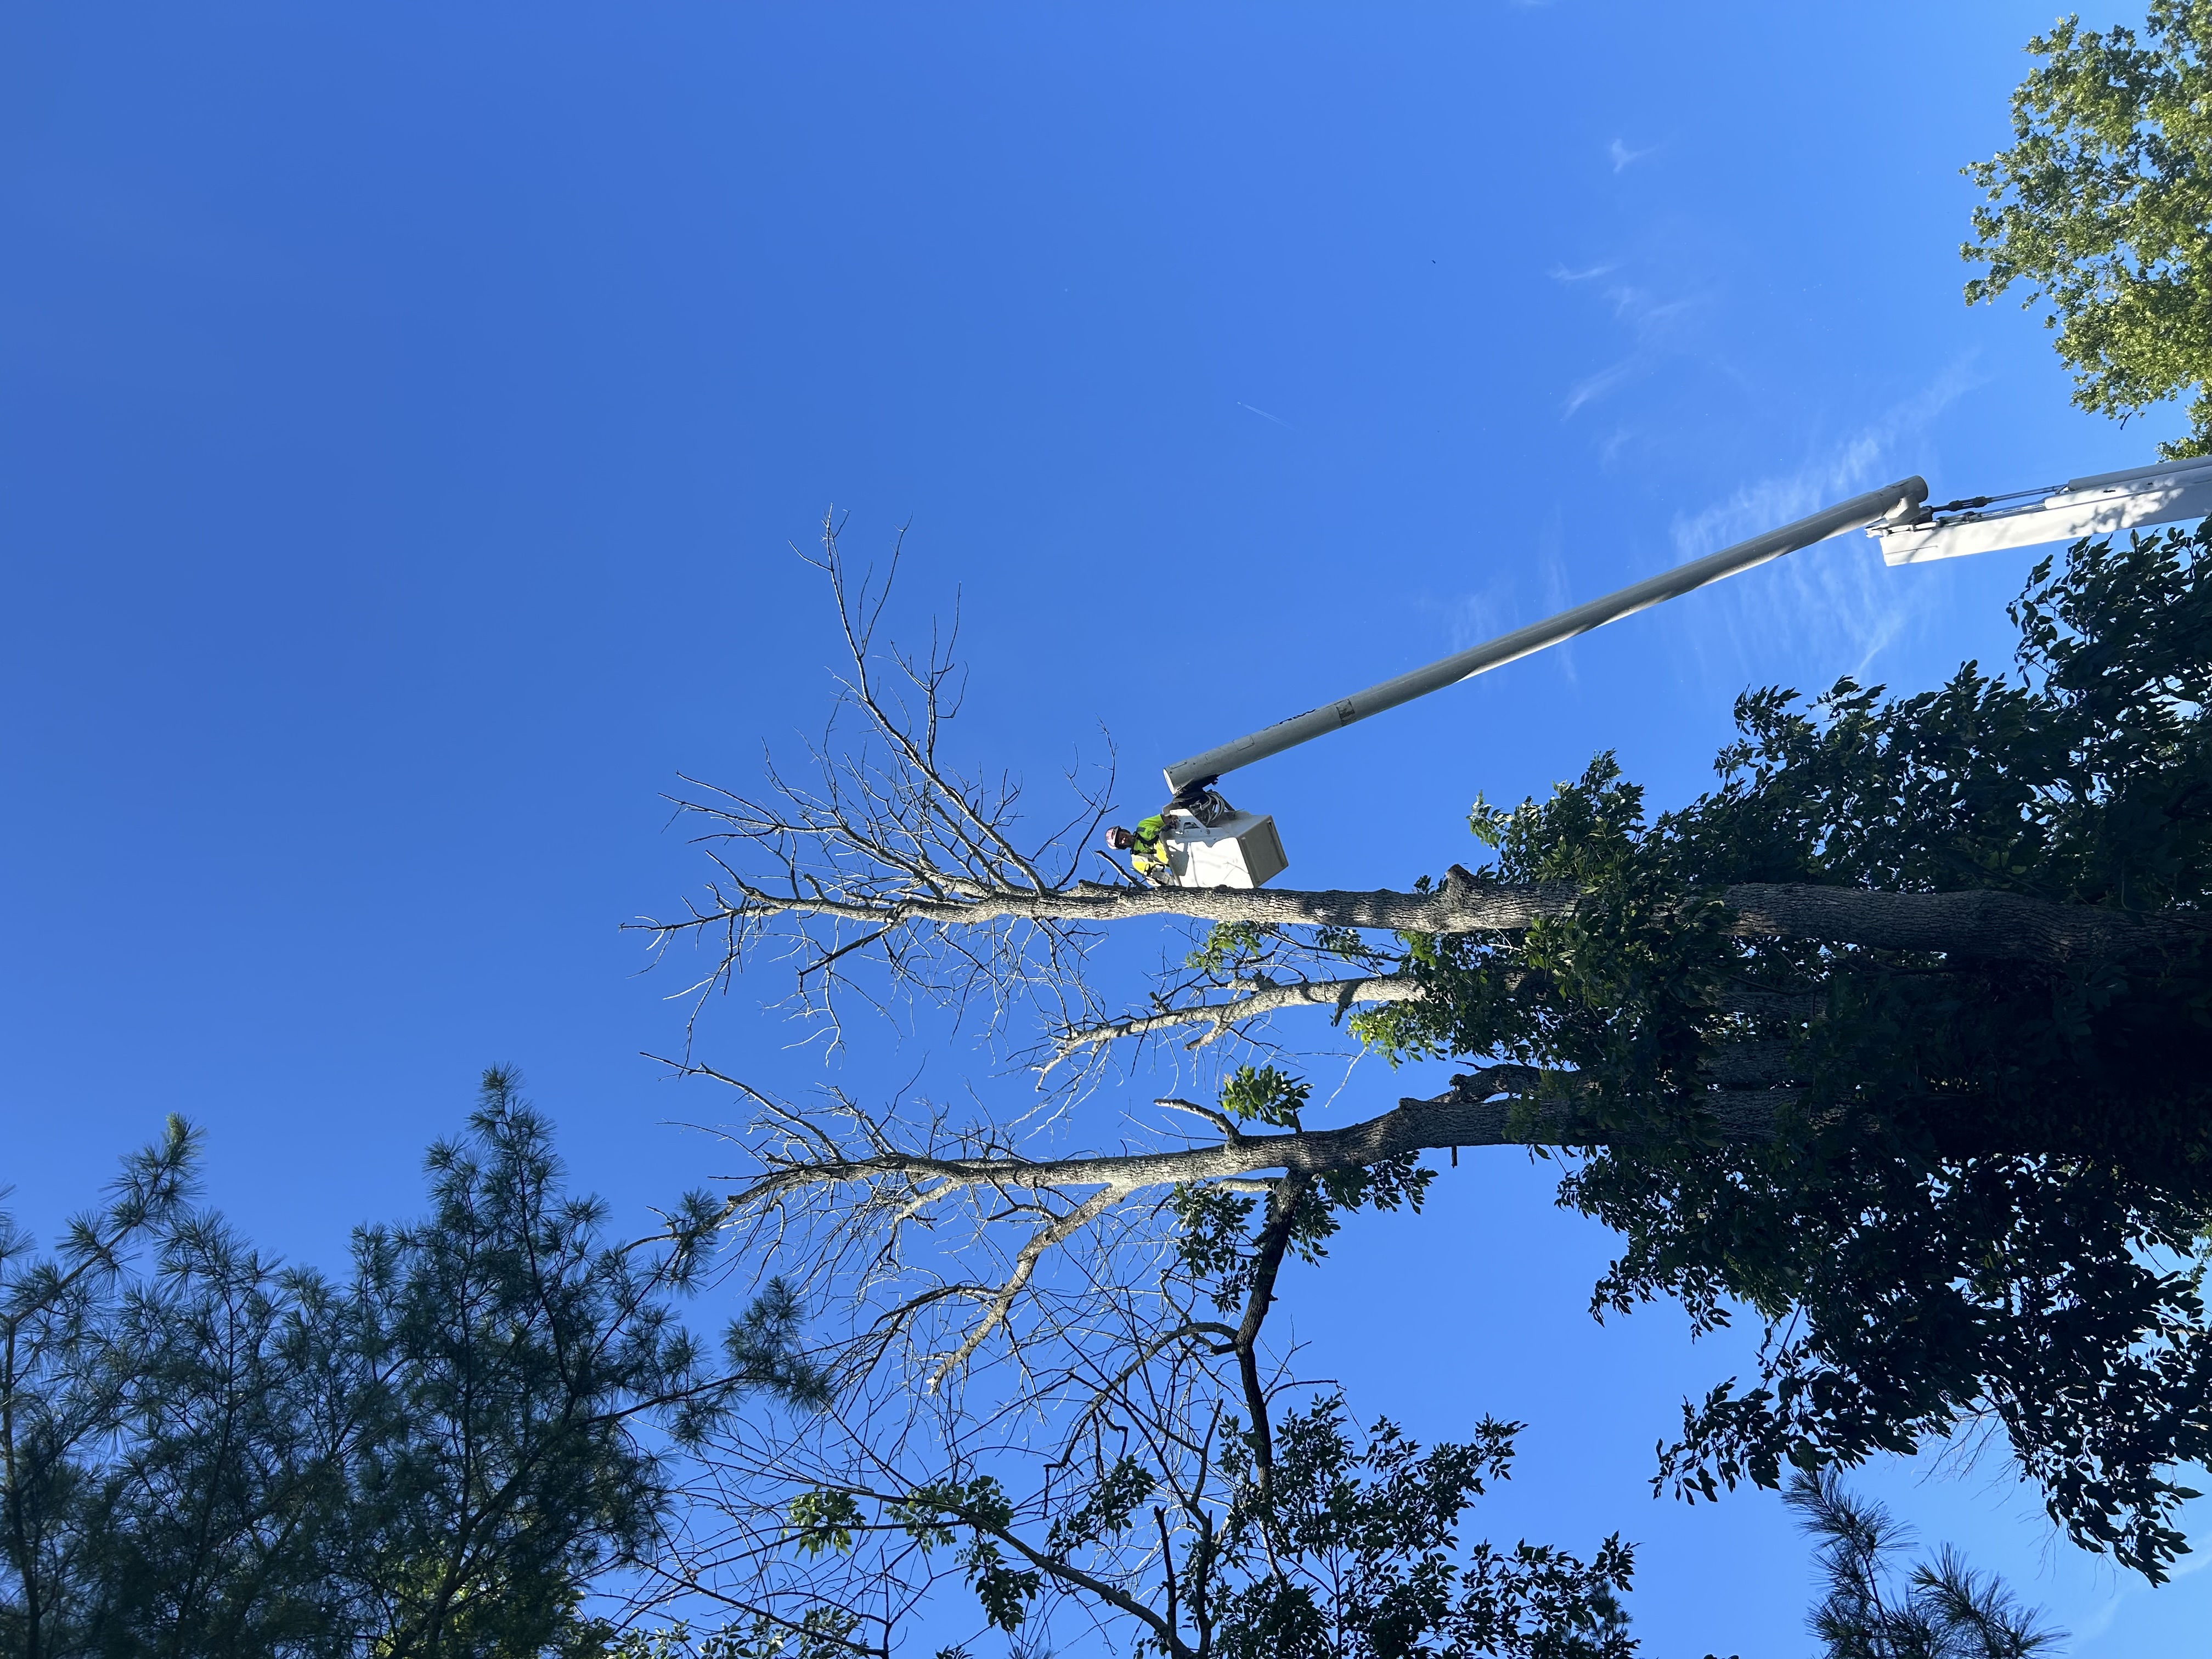 Dead Ash Tree removals and pruning in Easton, MD